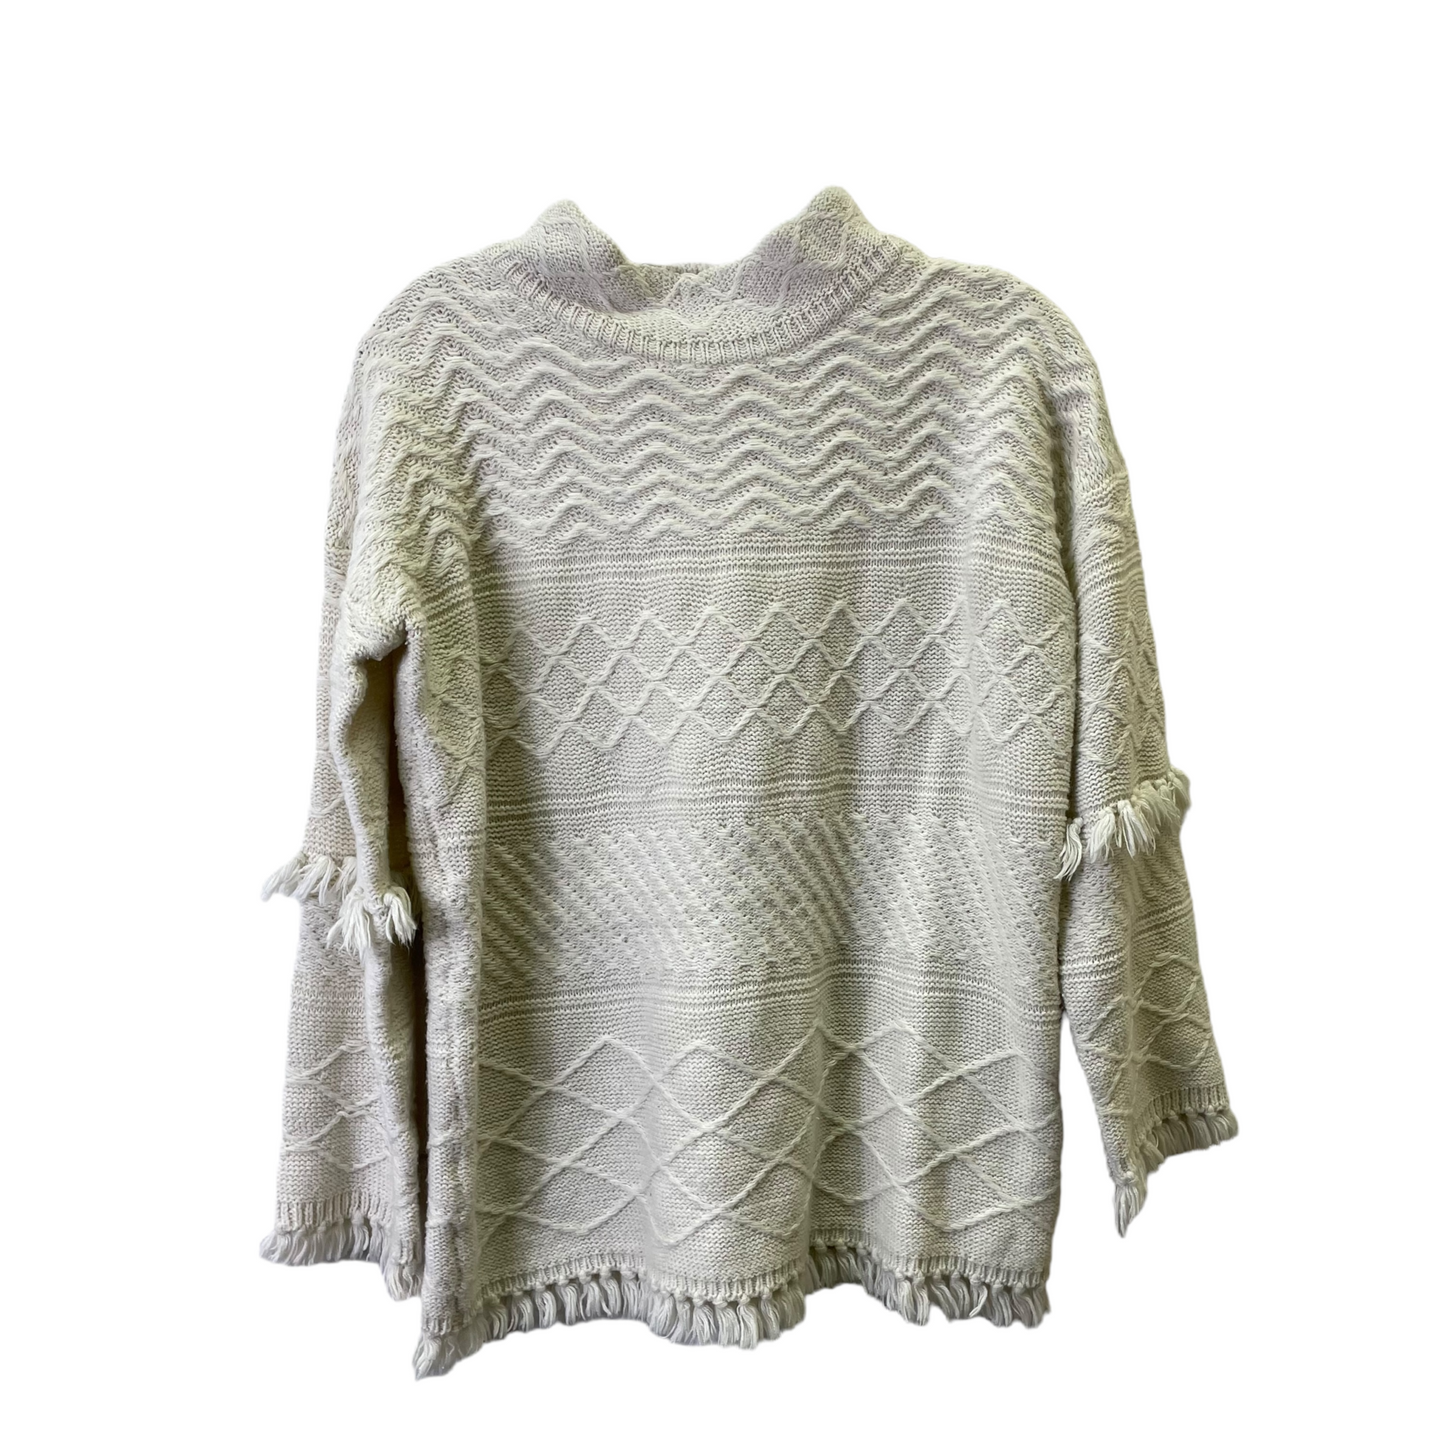 Sweater By Vernacular Size: M